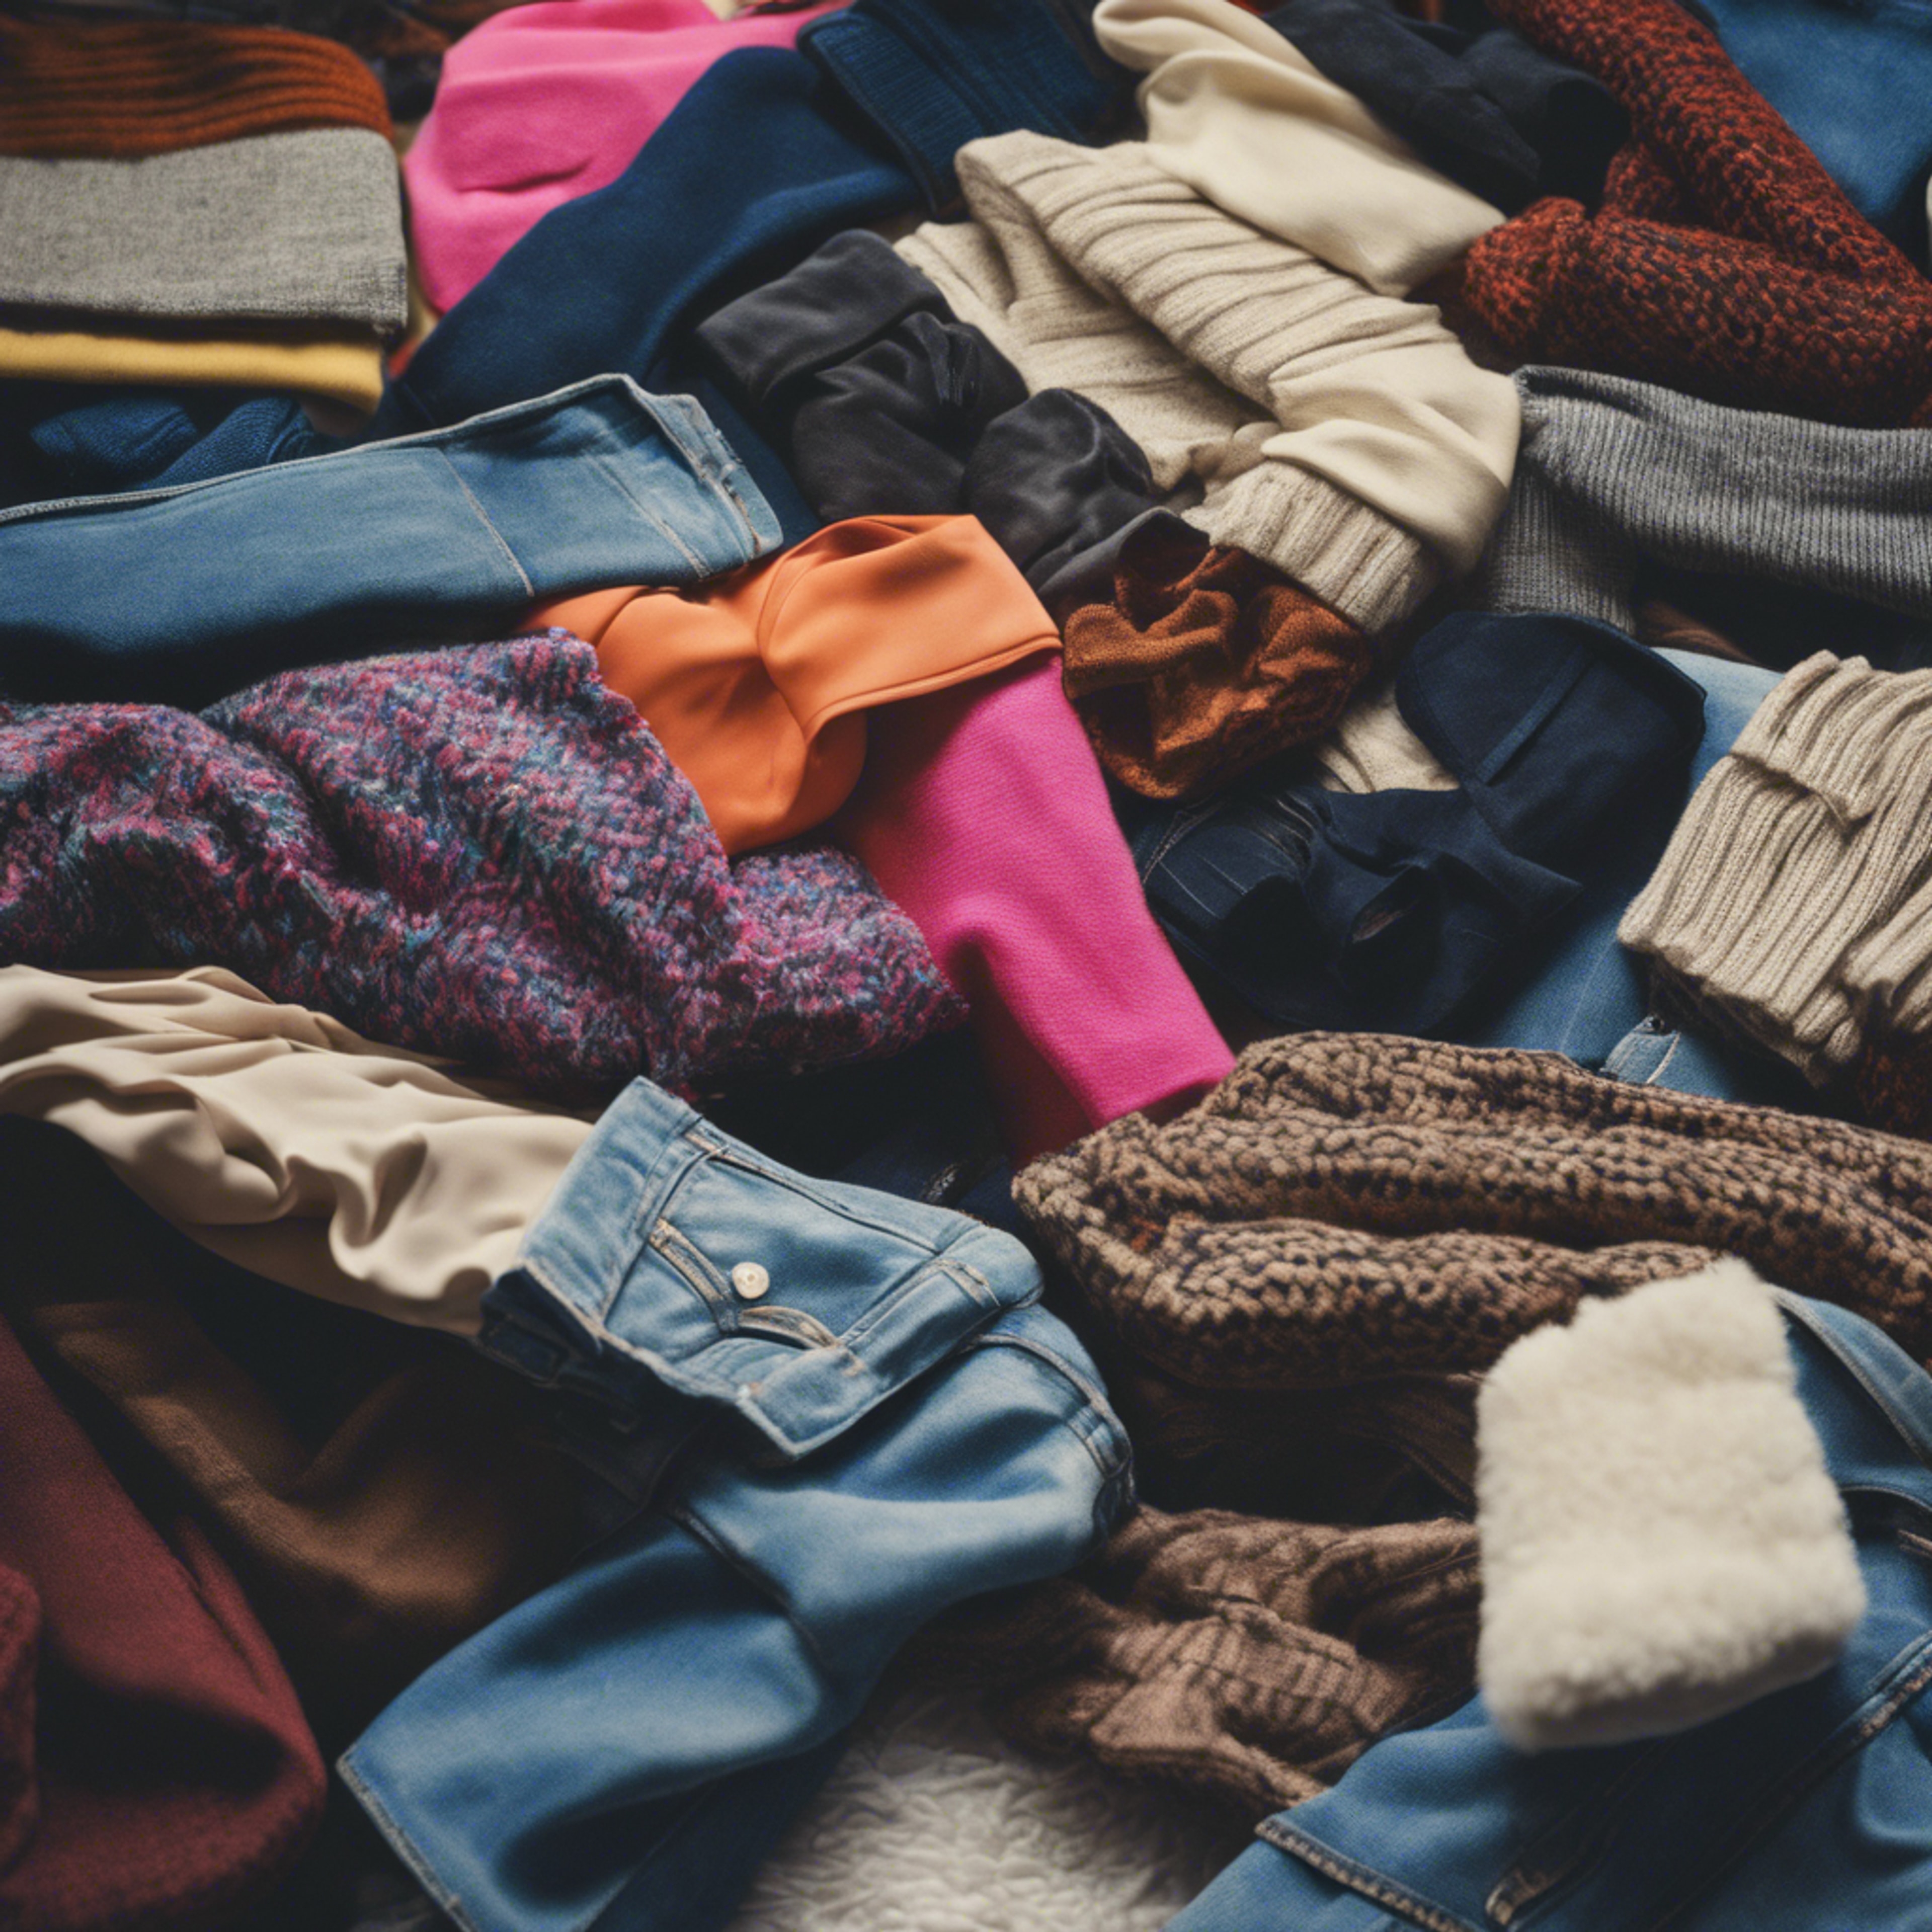 A pile of iconic 80s fashions such as leg warmers, oversized blazers, and high-waisted jeans. วอลล์เปเปอร์[dbd69f645b7844d6a4c4]